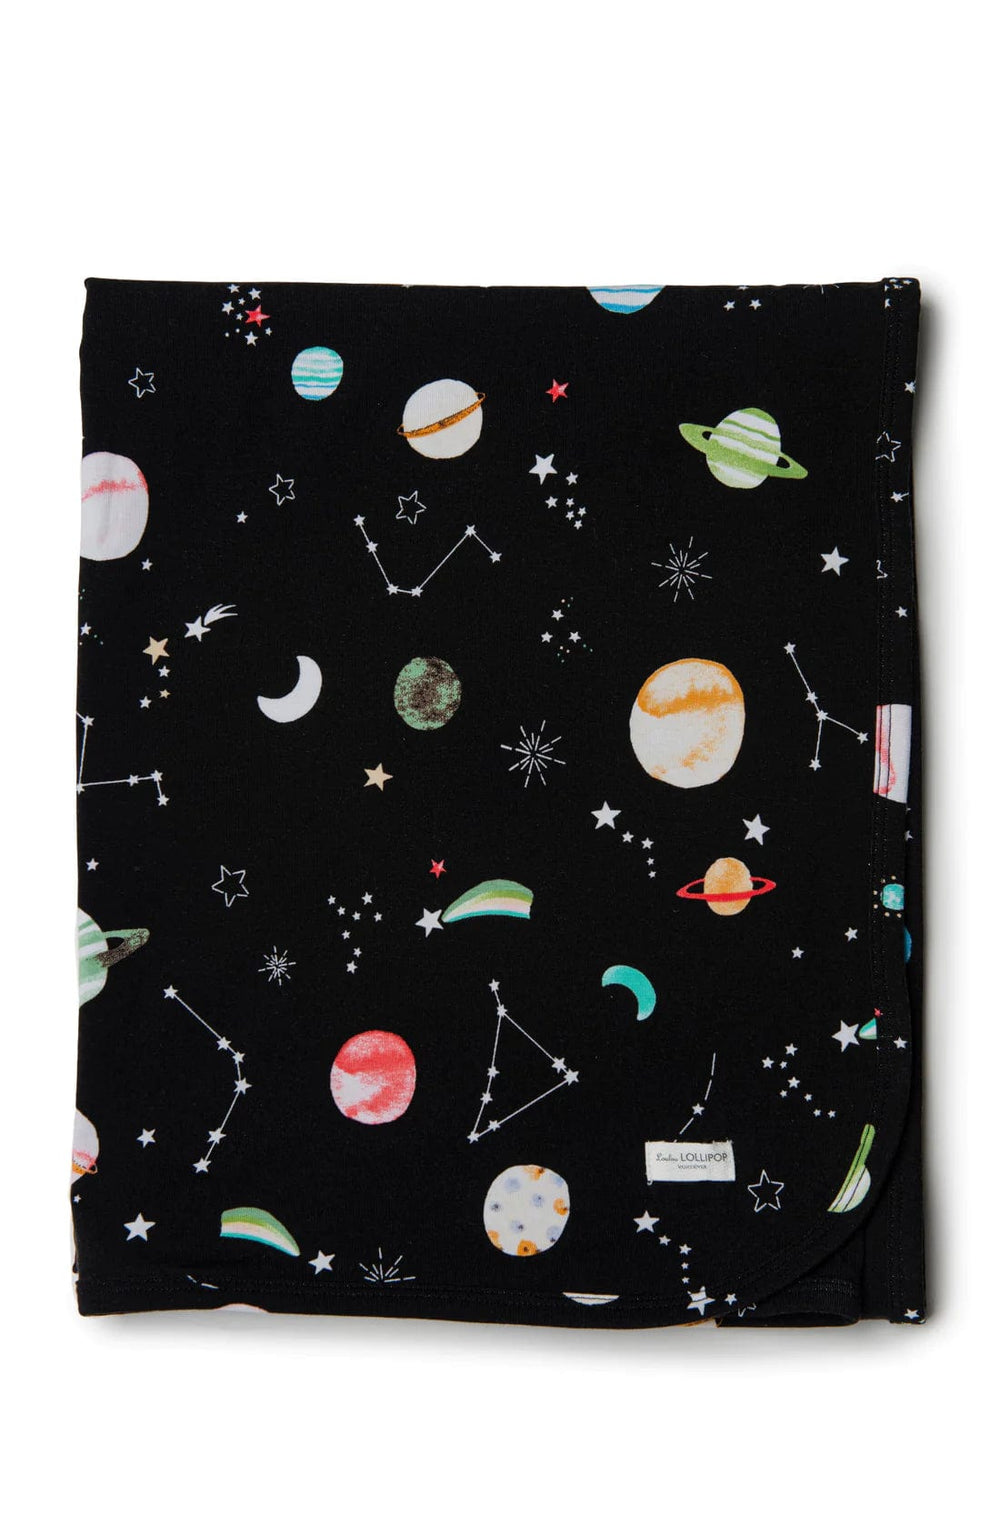 Stretch Knit Blanket - Planets LouLou Lollipop Lil Tulips